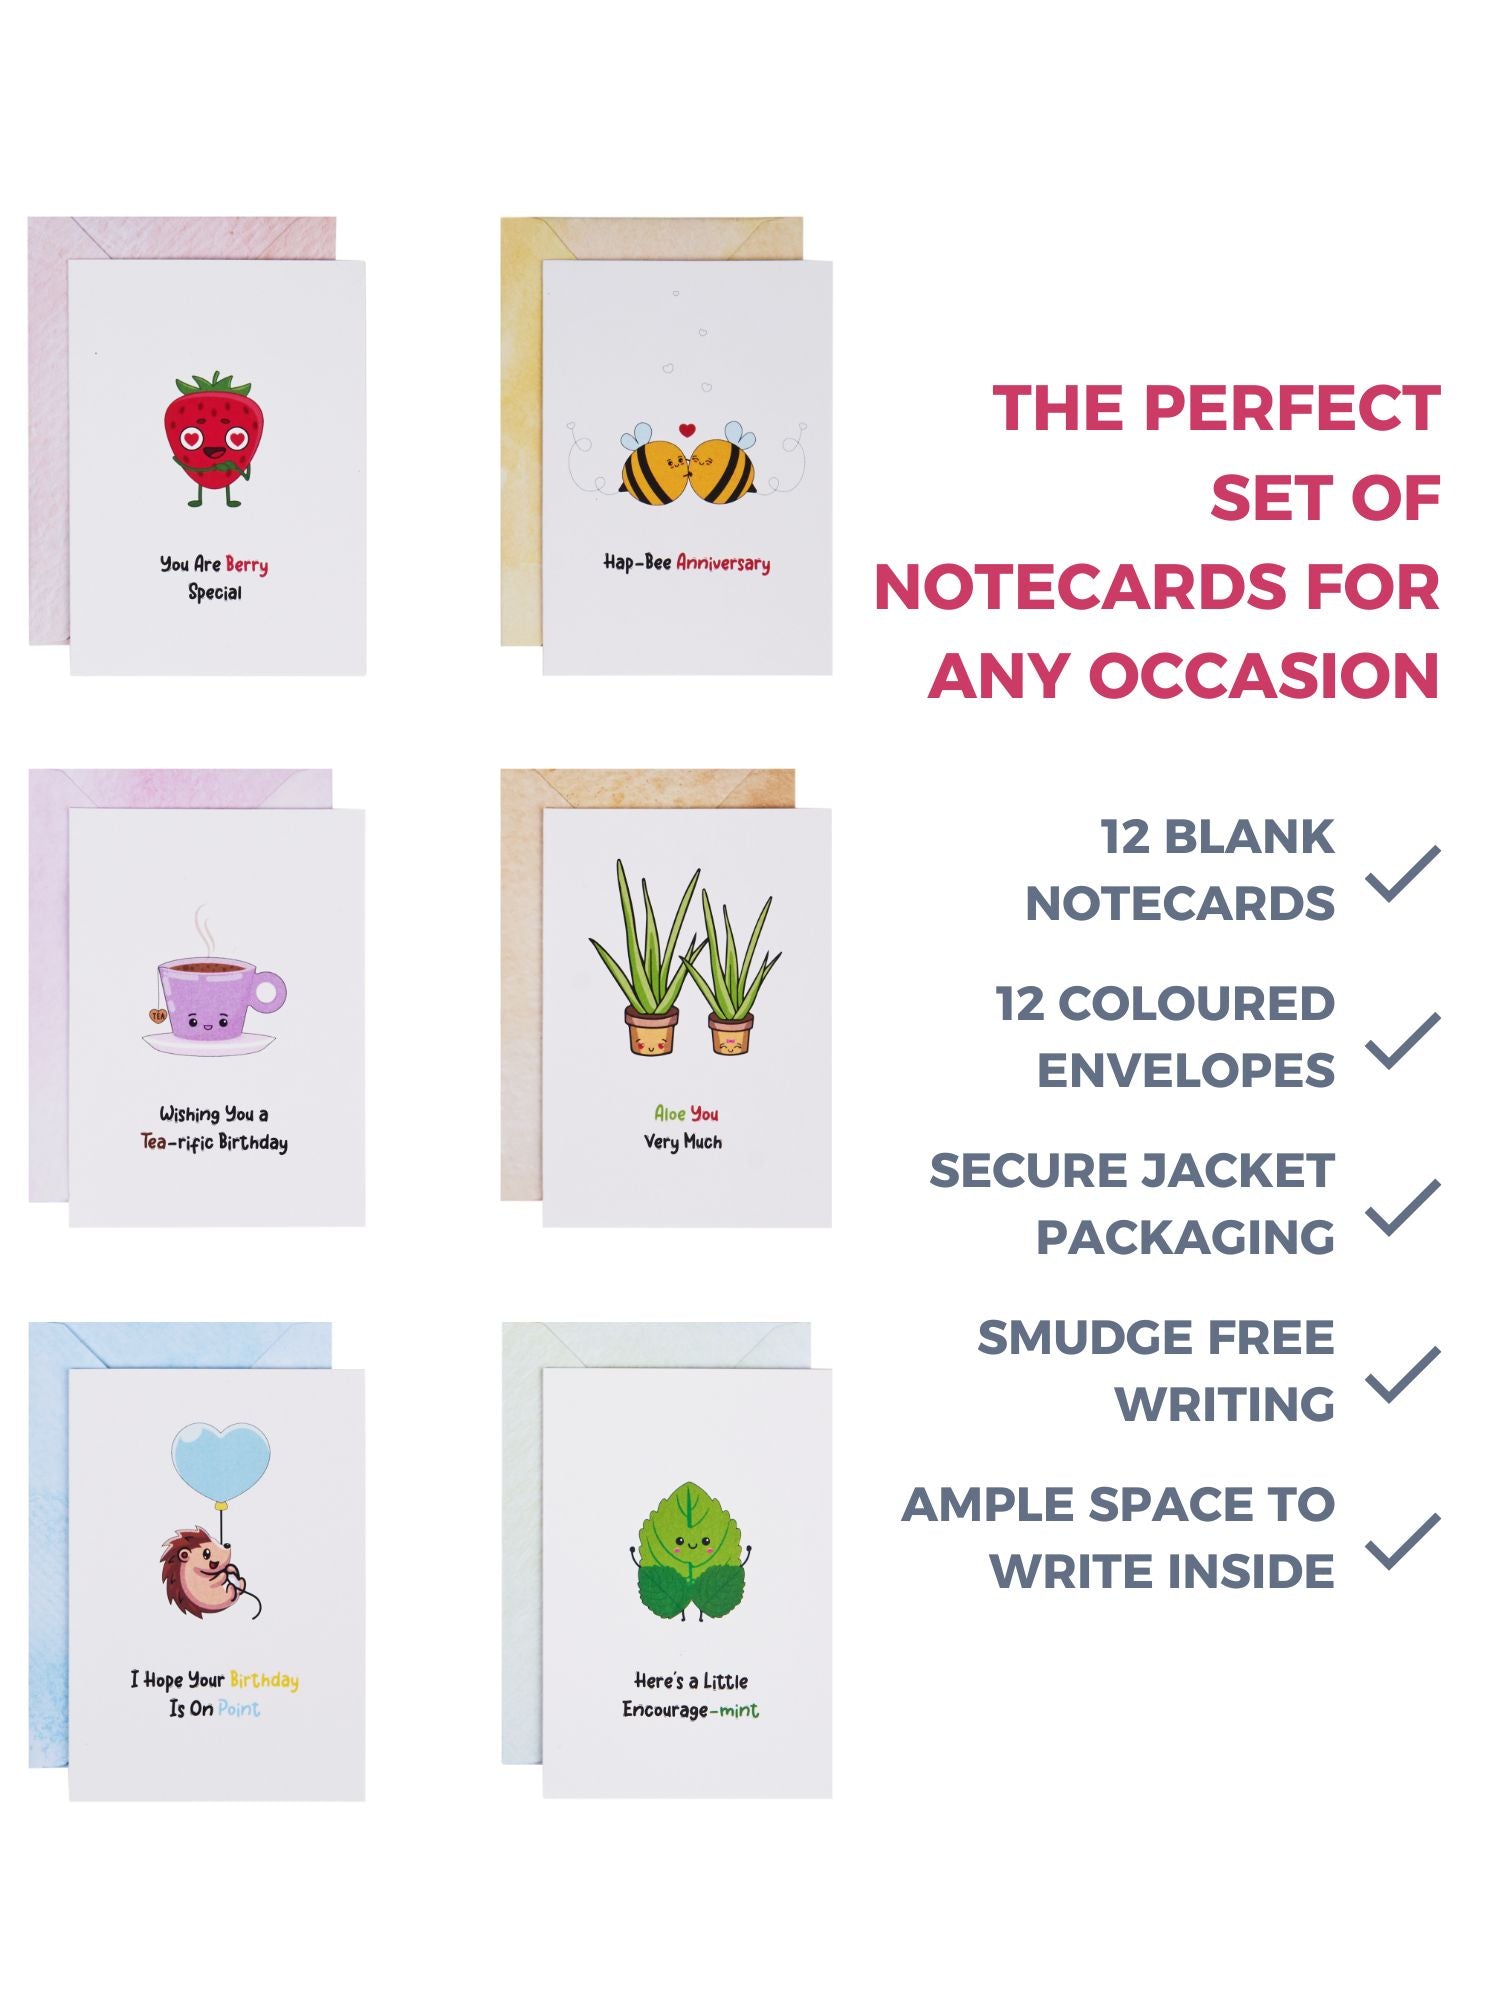 Doodle Set of 12 Blank Notecards with Coloured Envelopes and Jacket Style Packaging (Pun intended I)